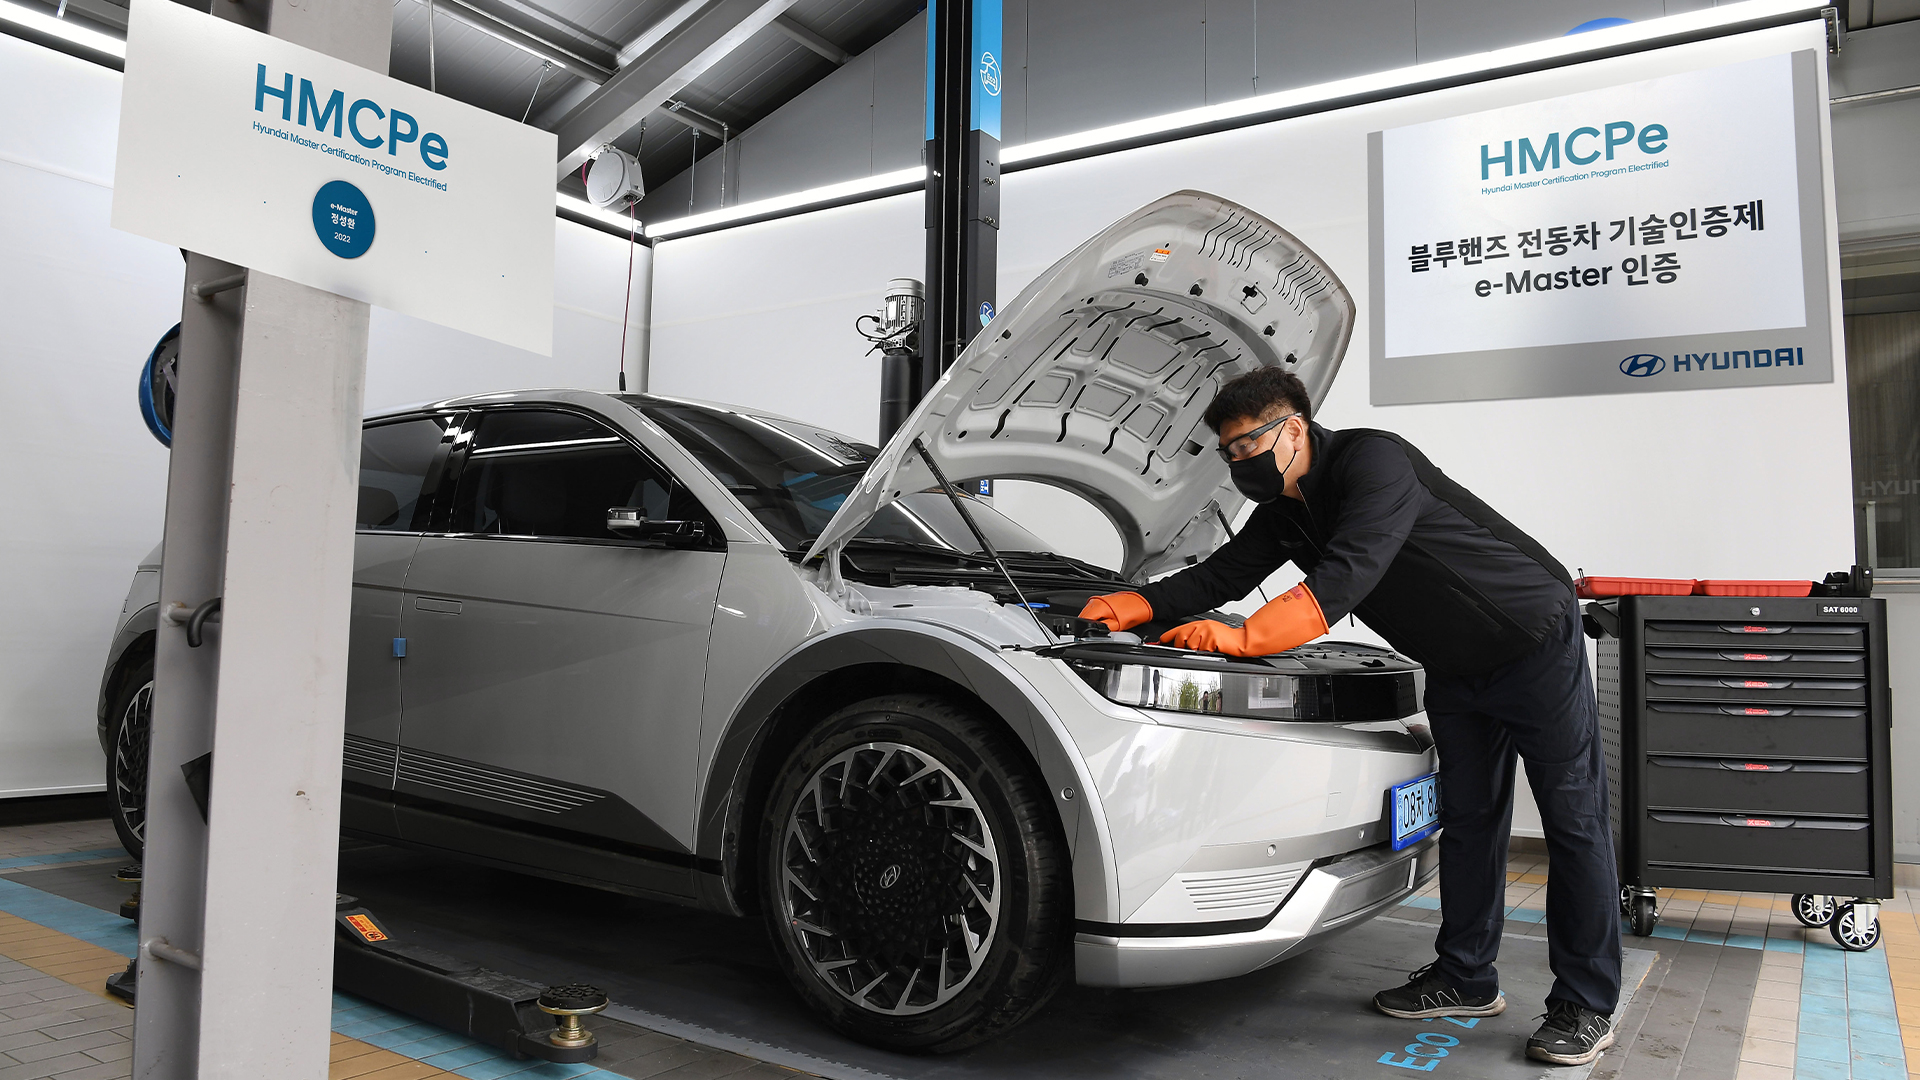 A mechanic is opening the bonnet of an electric car and inspecting the vehicle